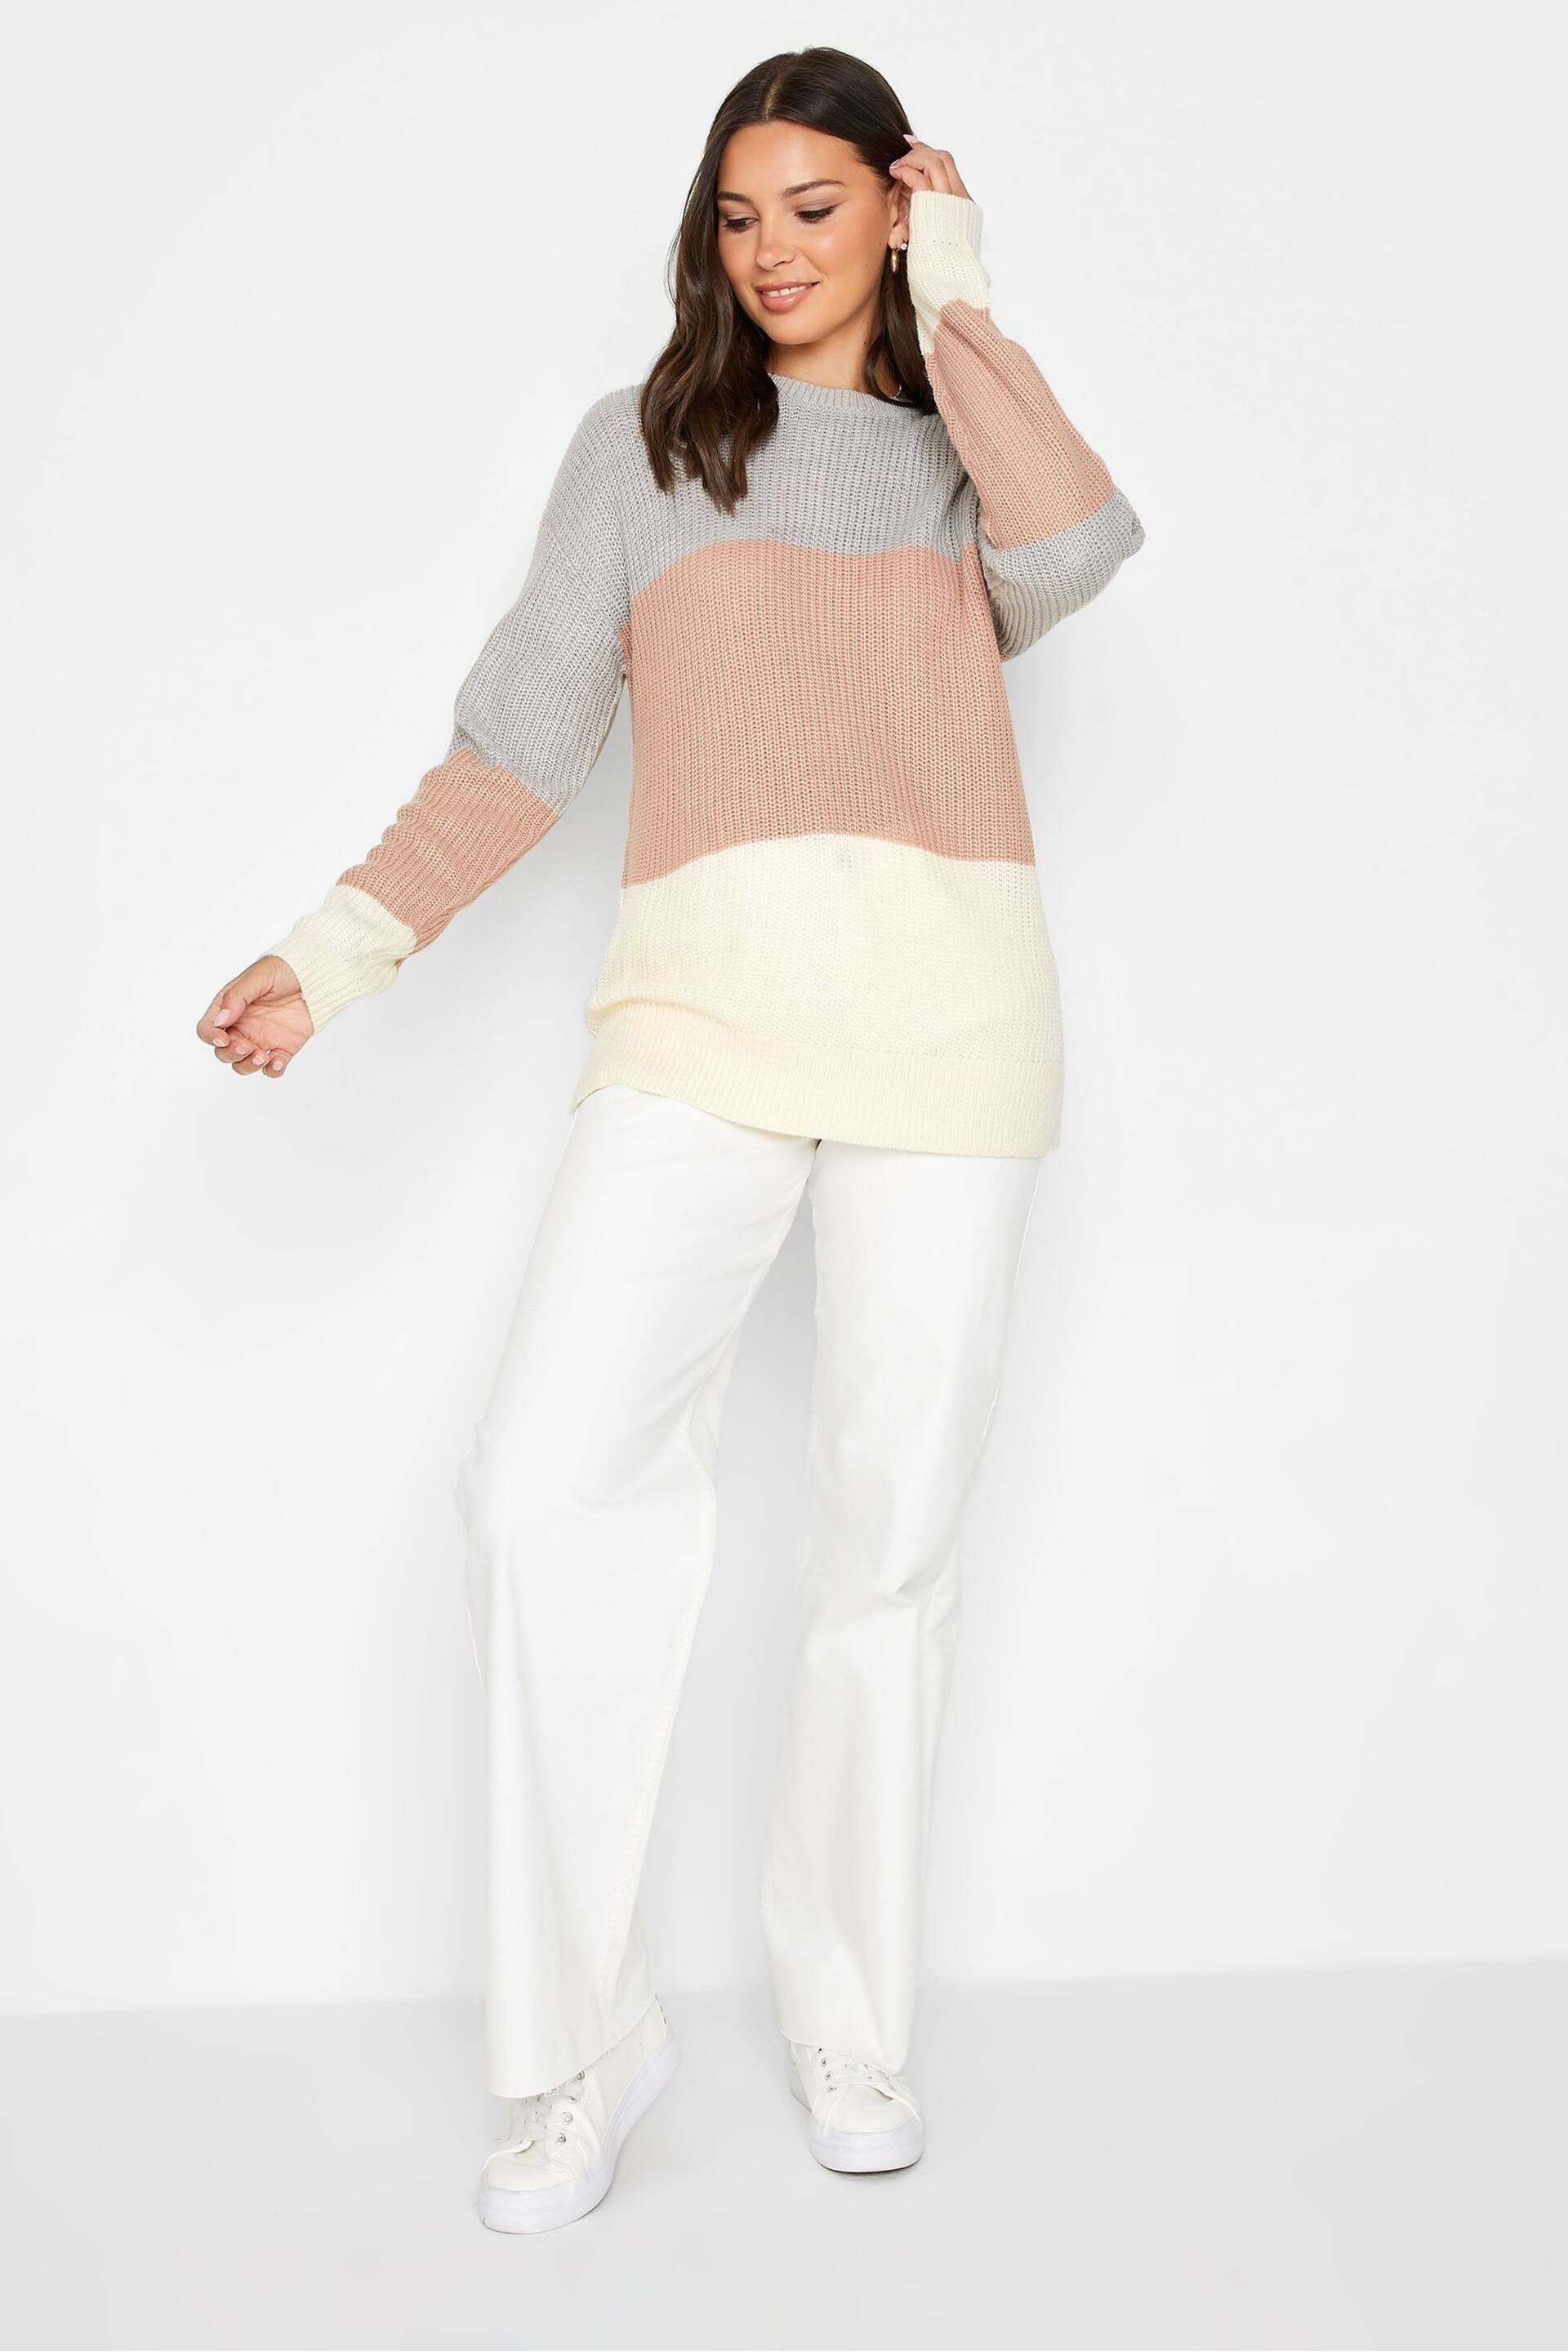 Long Tall Sally Pink Jumper - Image 3 of 4